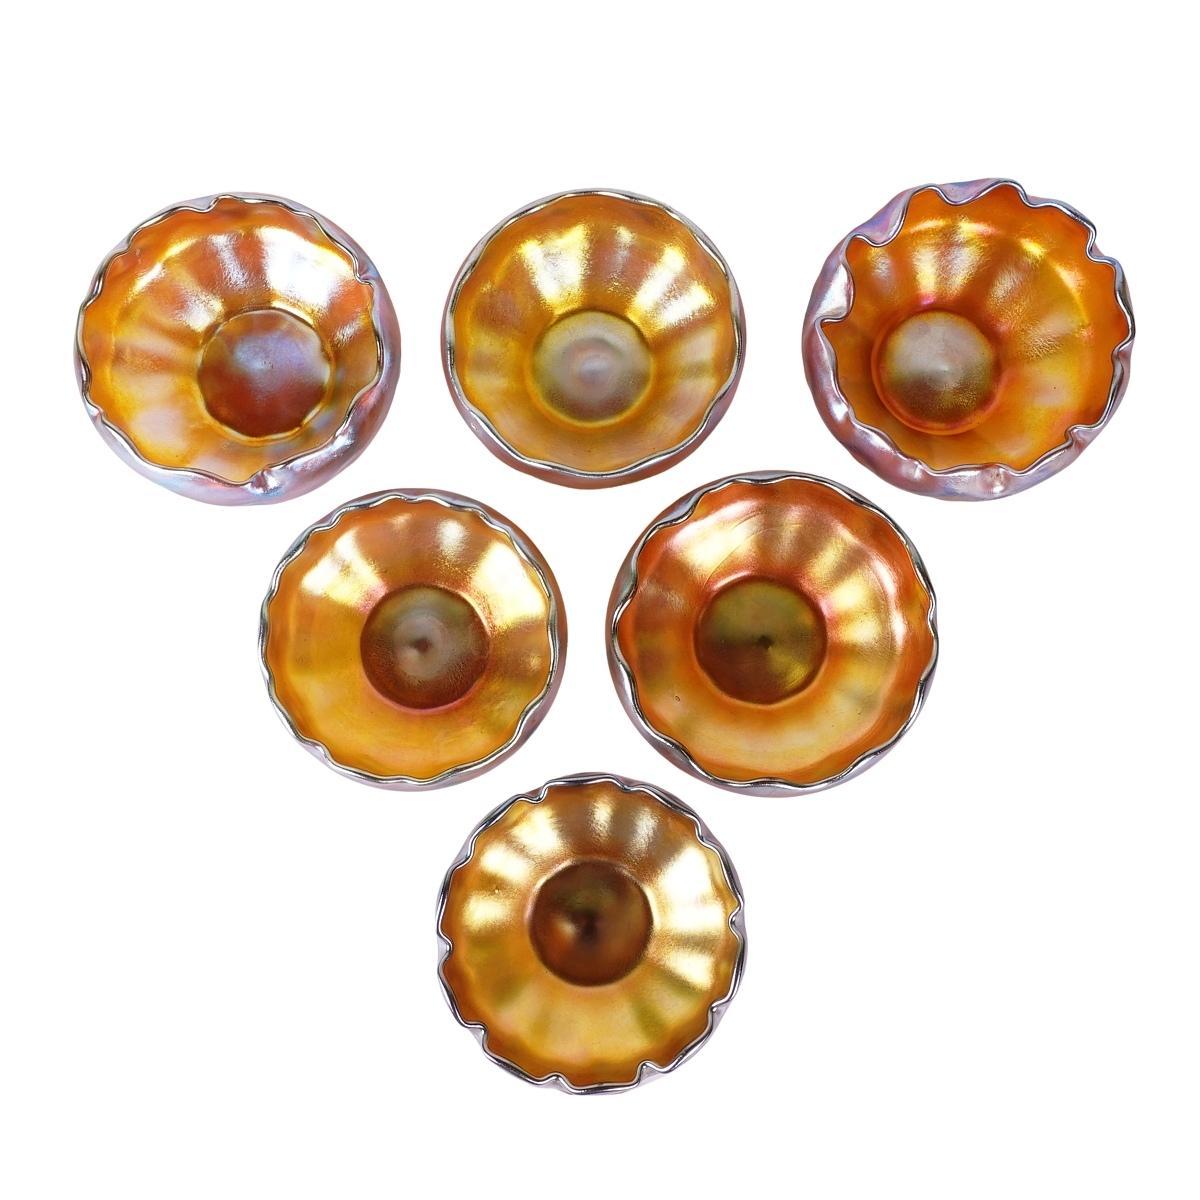 Offering this amazing set of six Louis Comfort Tiffany gold Favrile iridescent art glass nut or berry bowls. These 